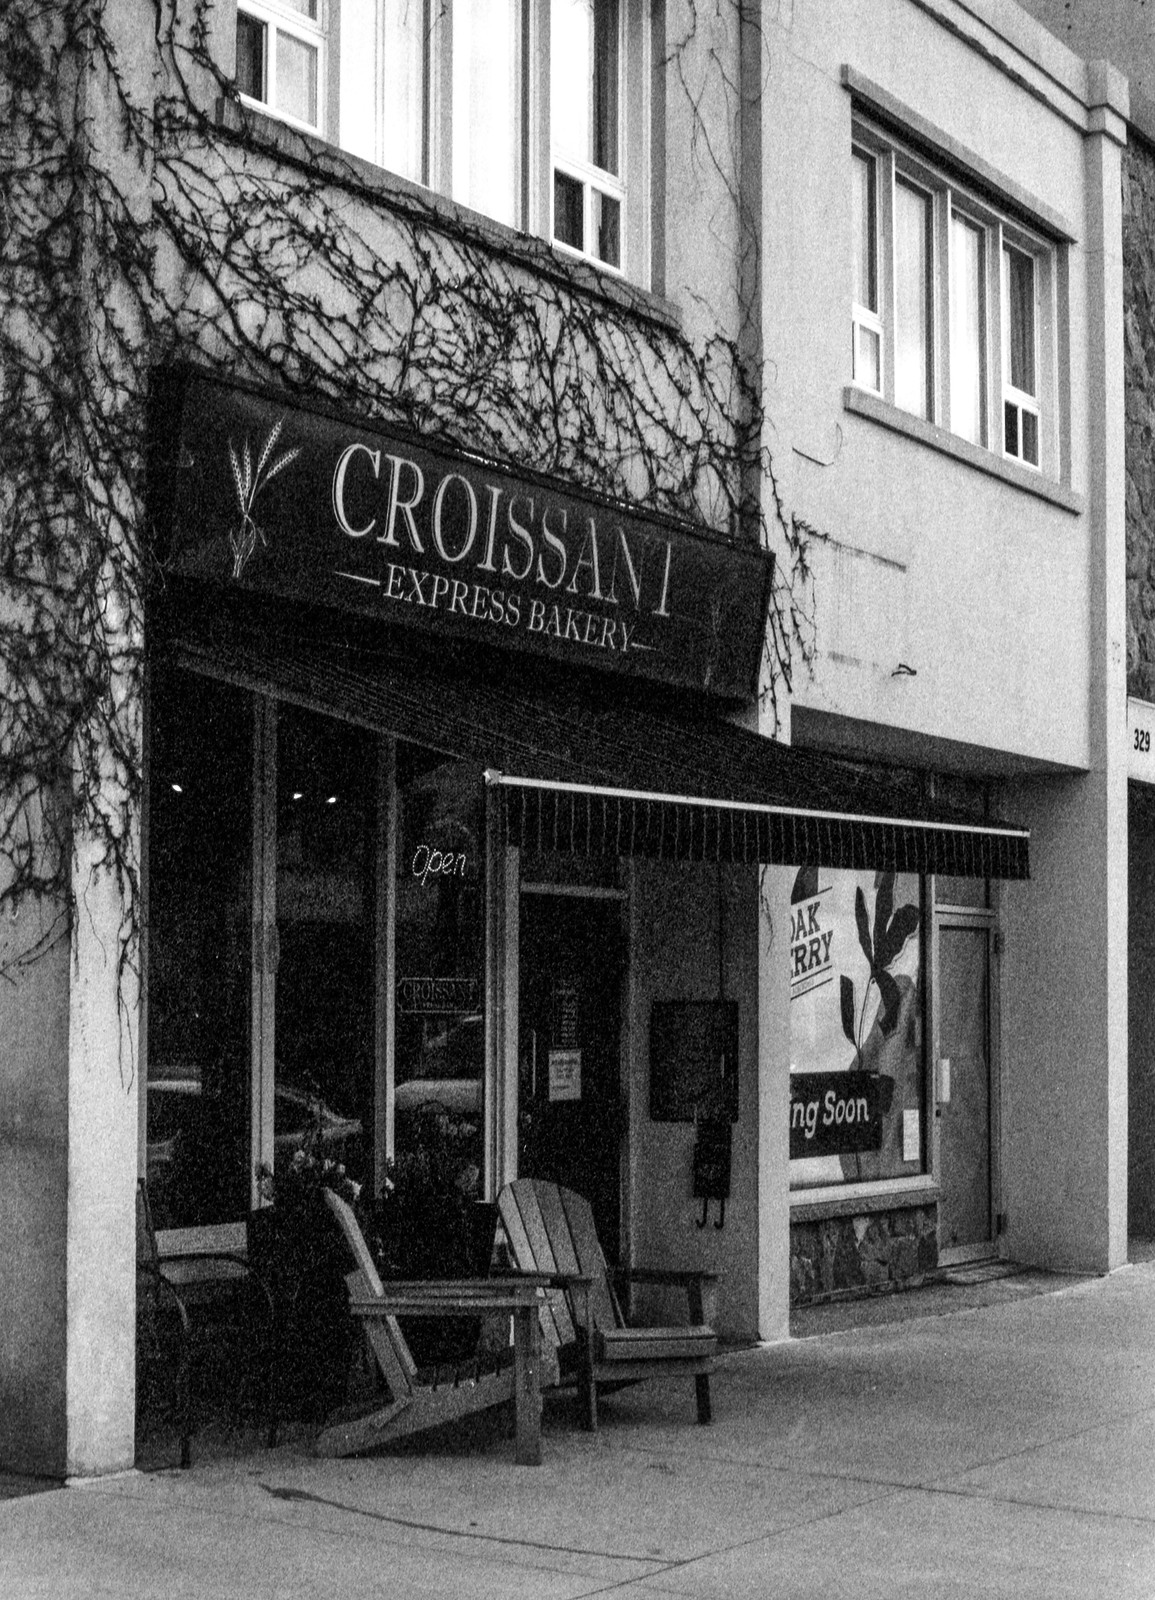 Croissant Express, an Institution